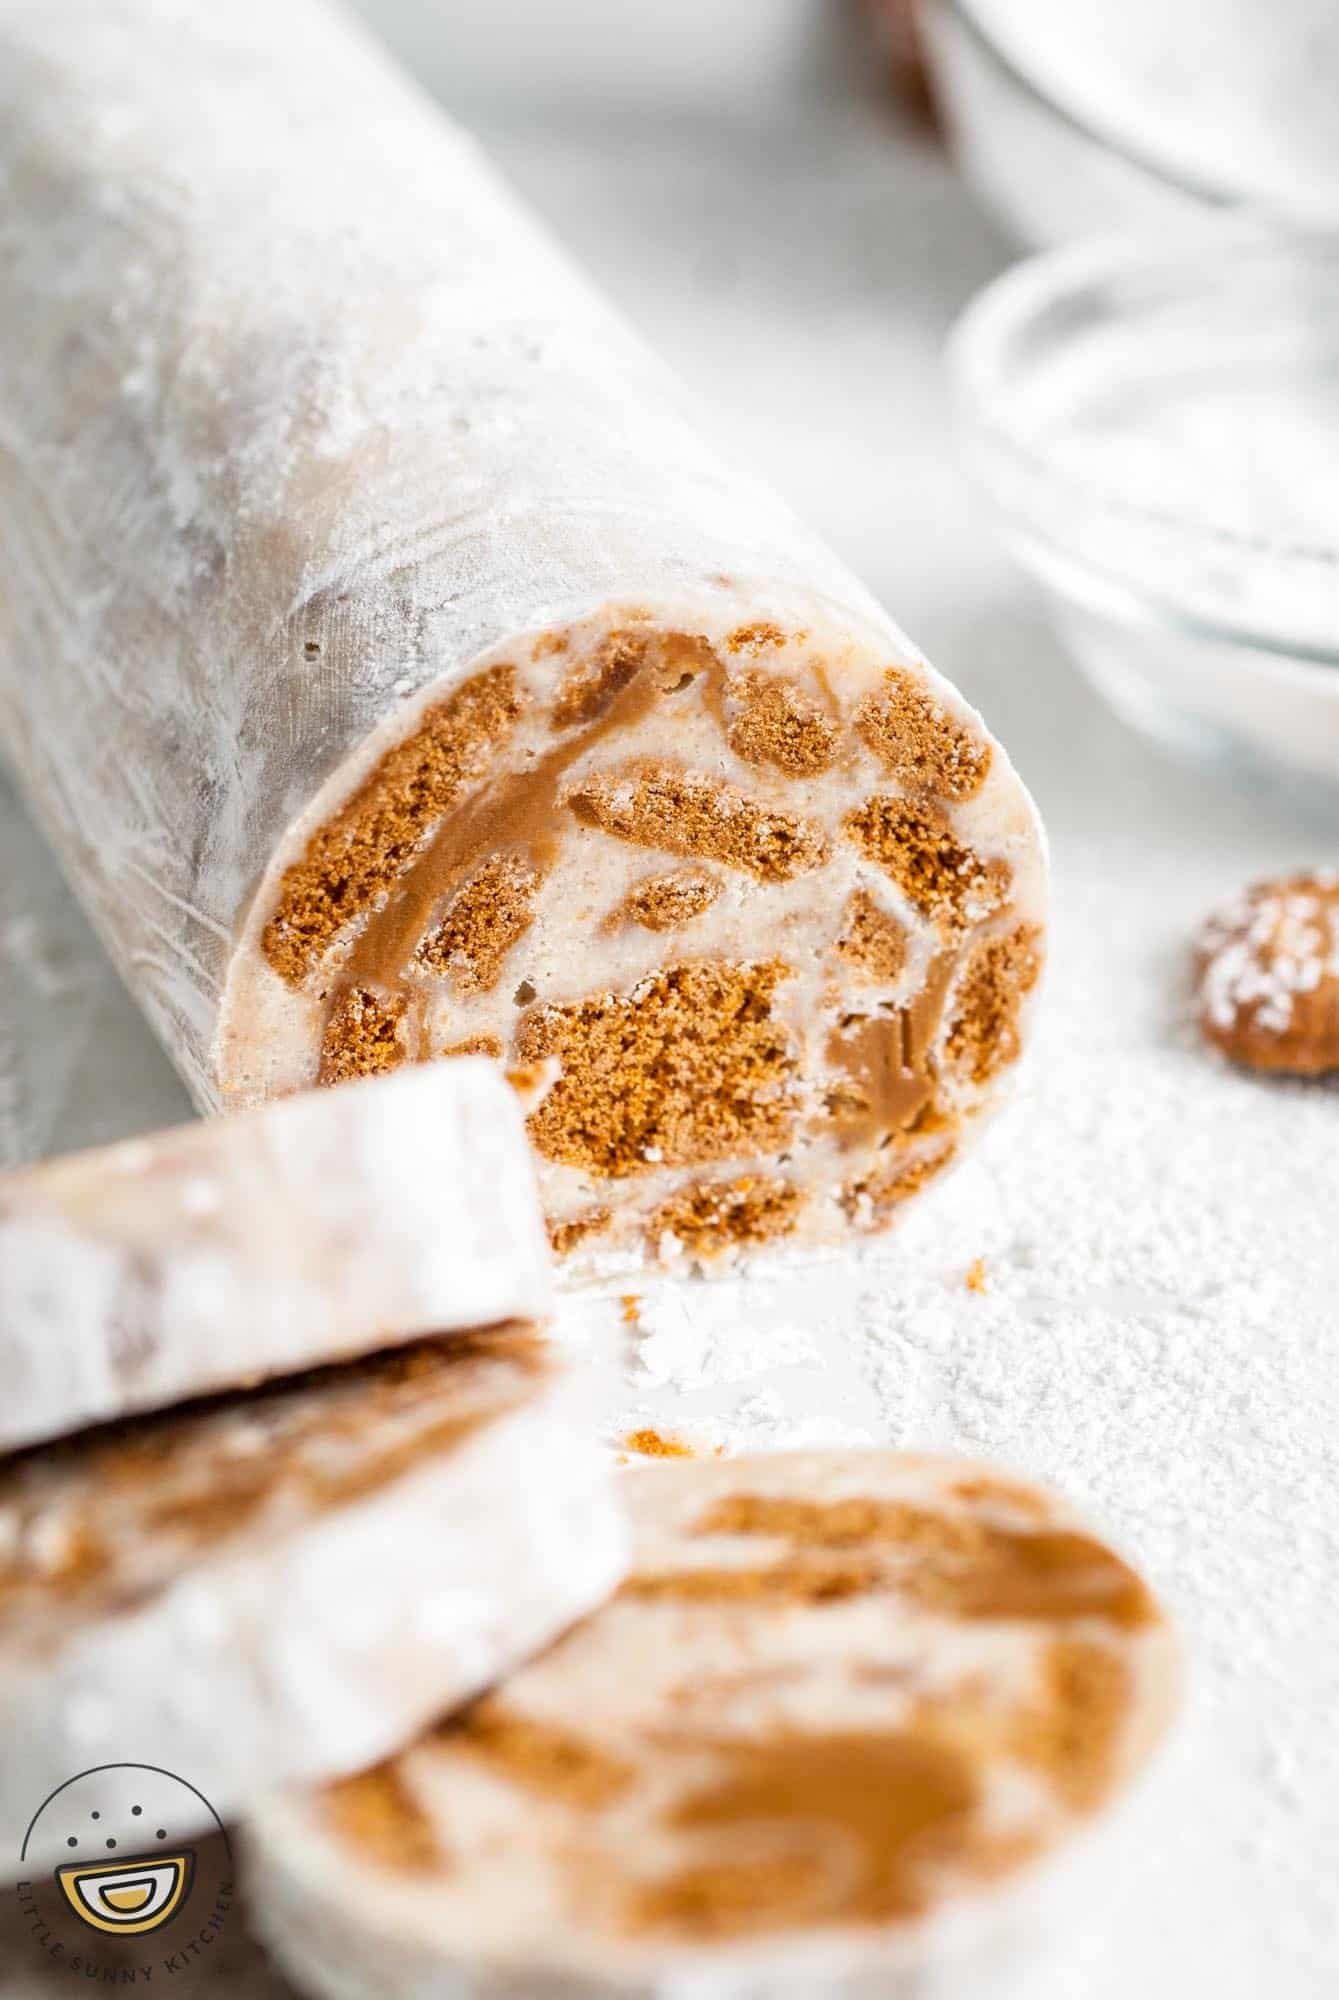 white chocolate biscoff salami dusted in powdered sugar. Three slices have been removed from the front.